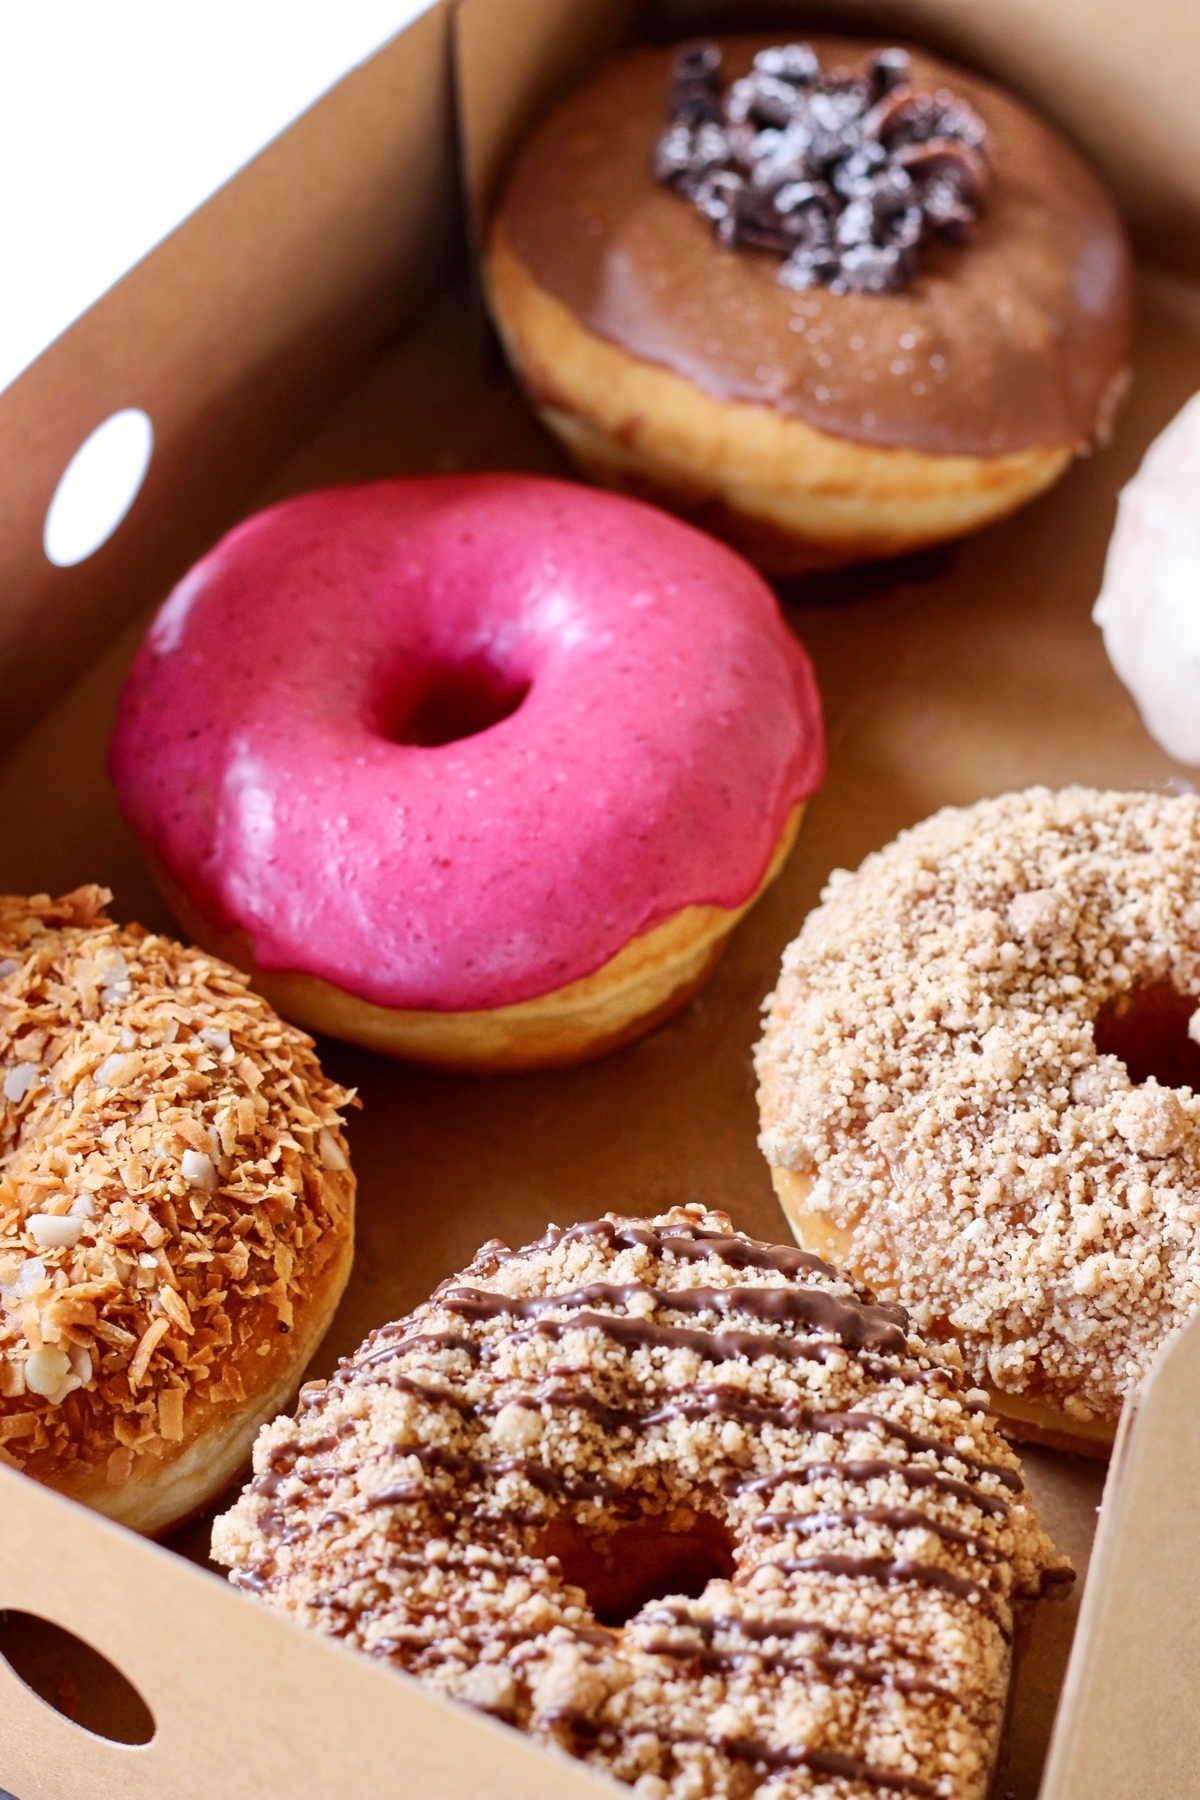 National City to Welcome Barrio Donas’ Second Location